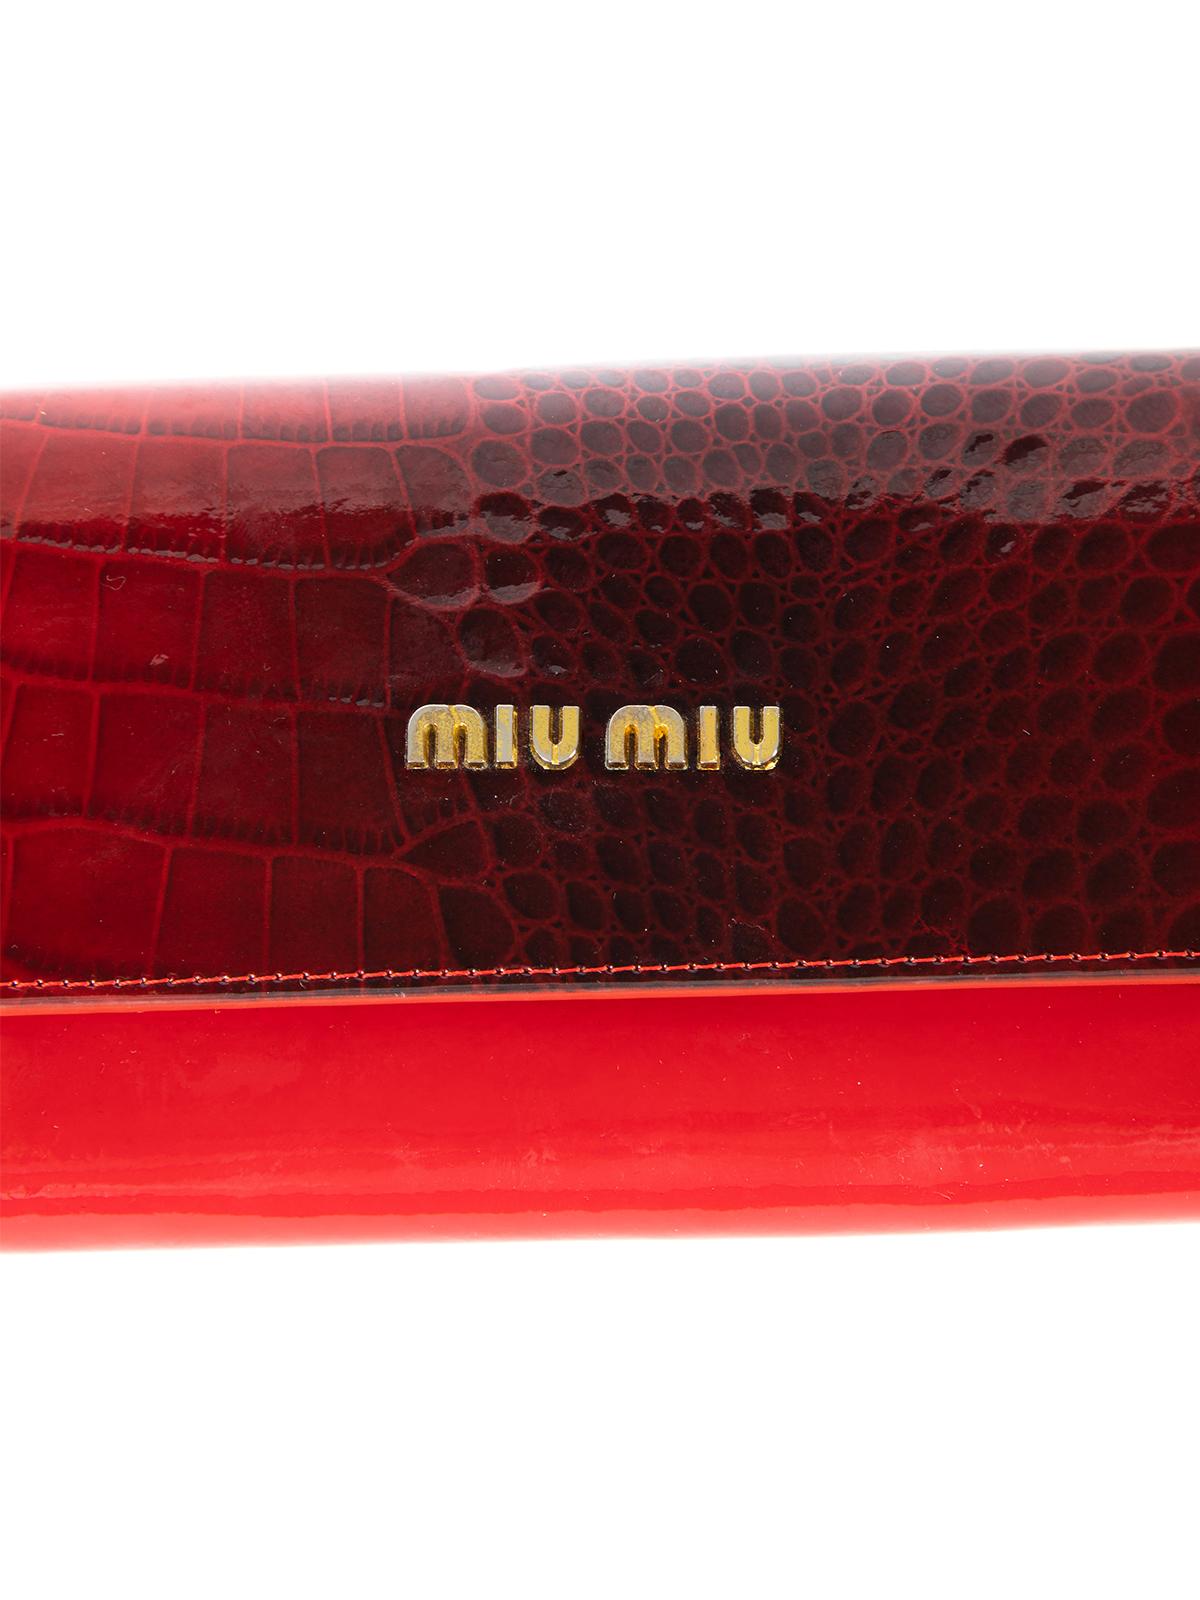 Pre-Loved Miu Miu Women's Red Patent Leather Wallet 3